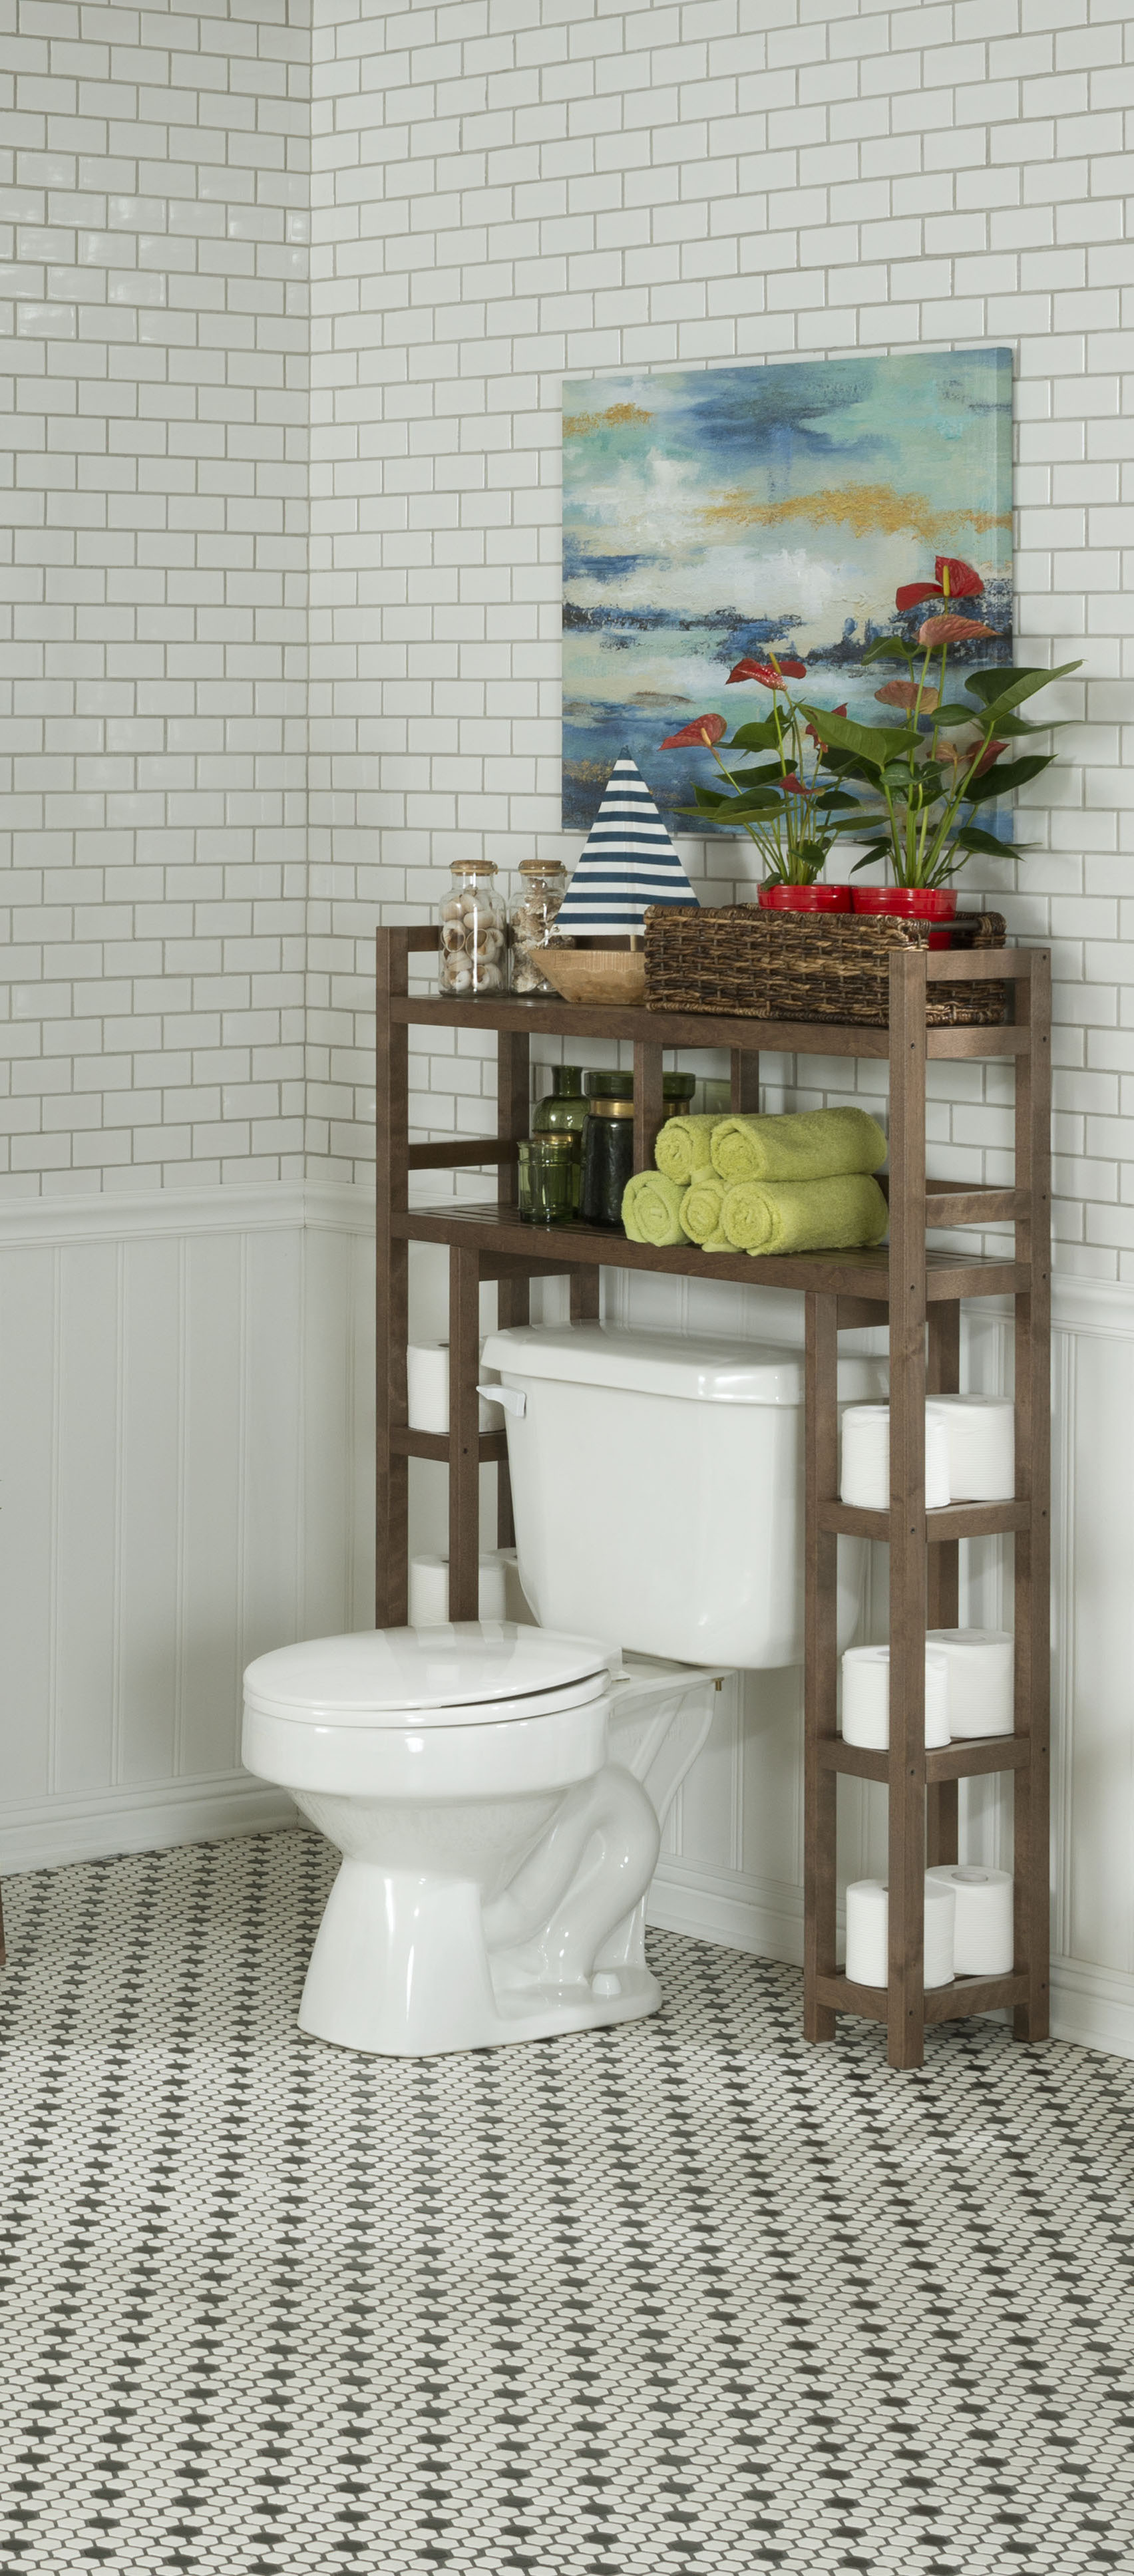 48" Bathroom Extra Storage with 2 Shelves in Antique Chestnut